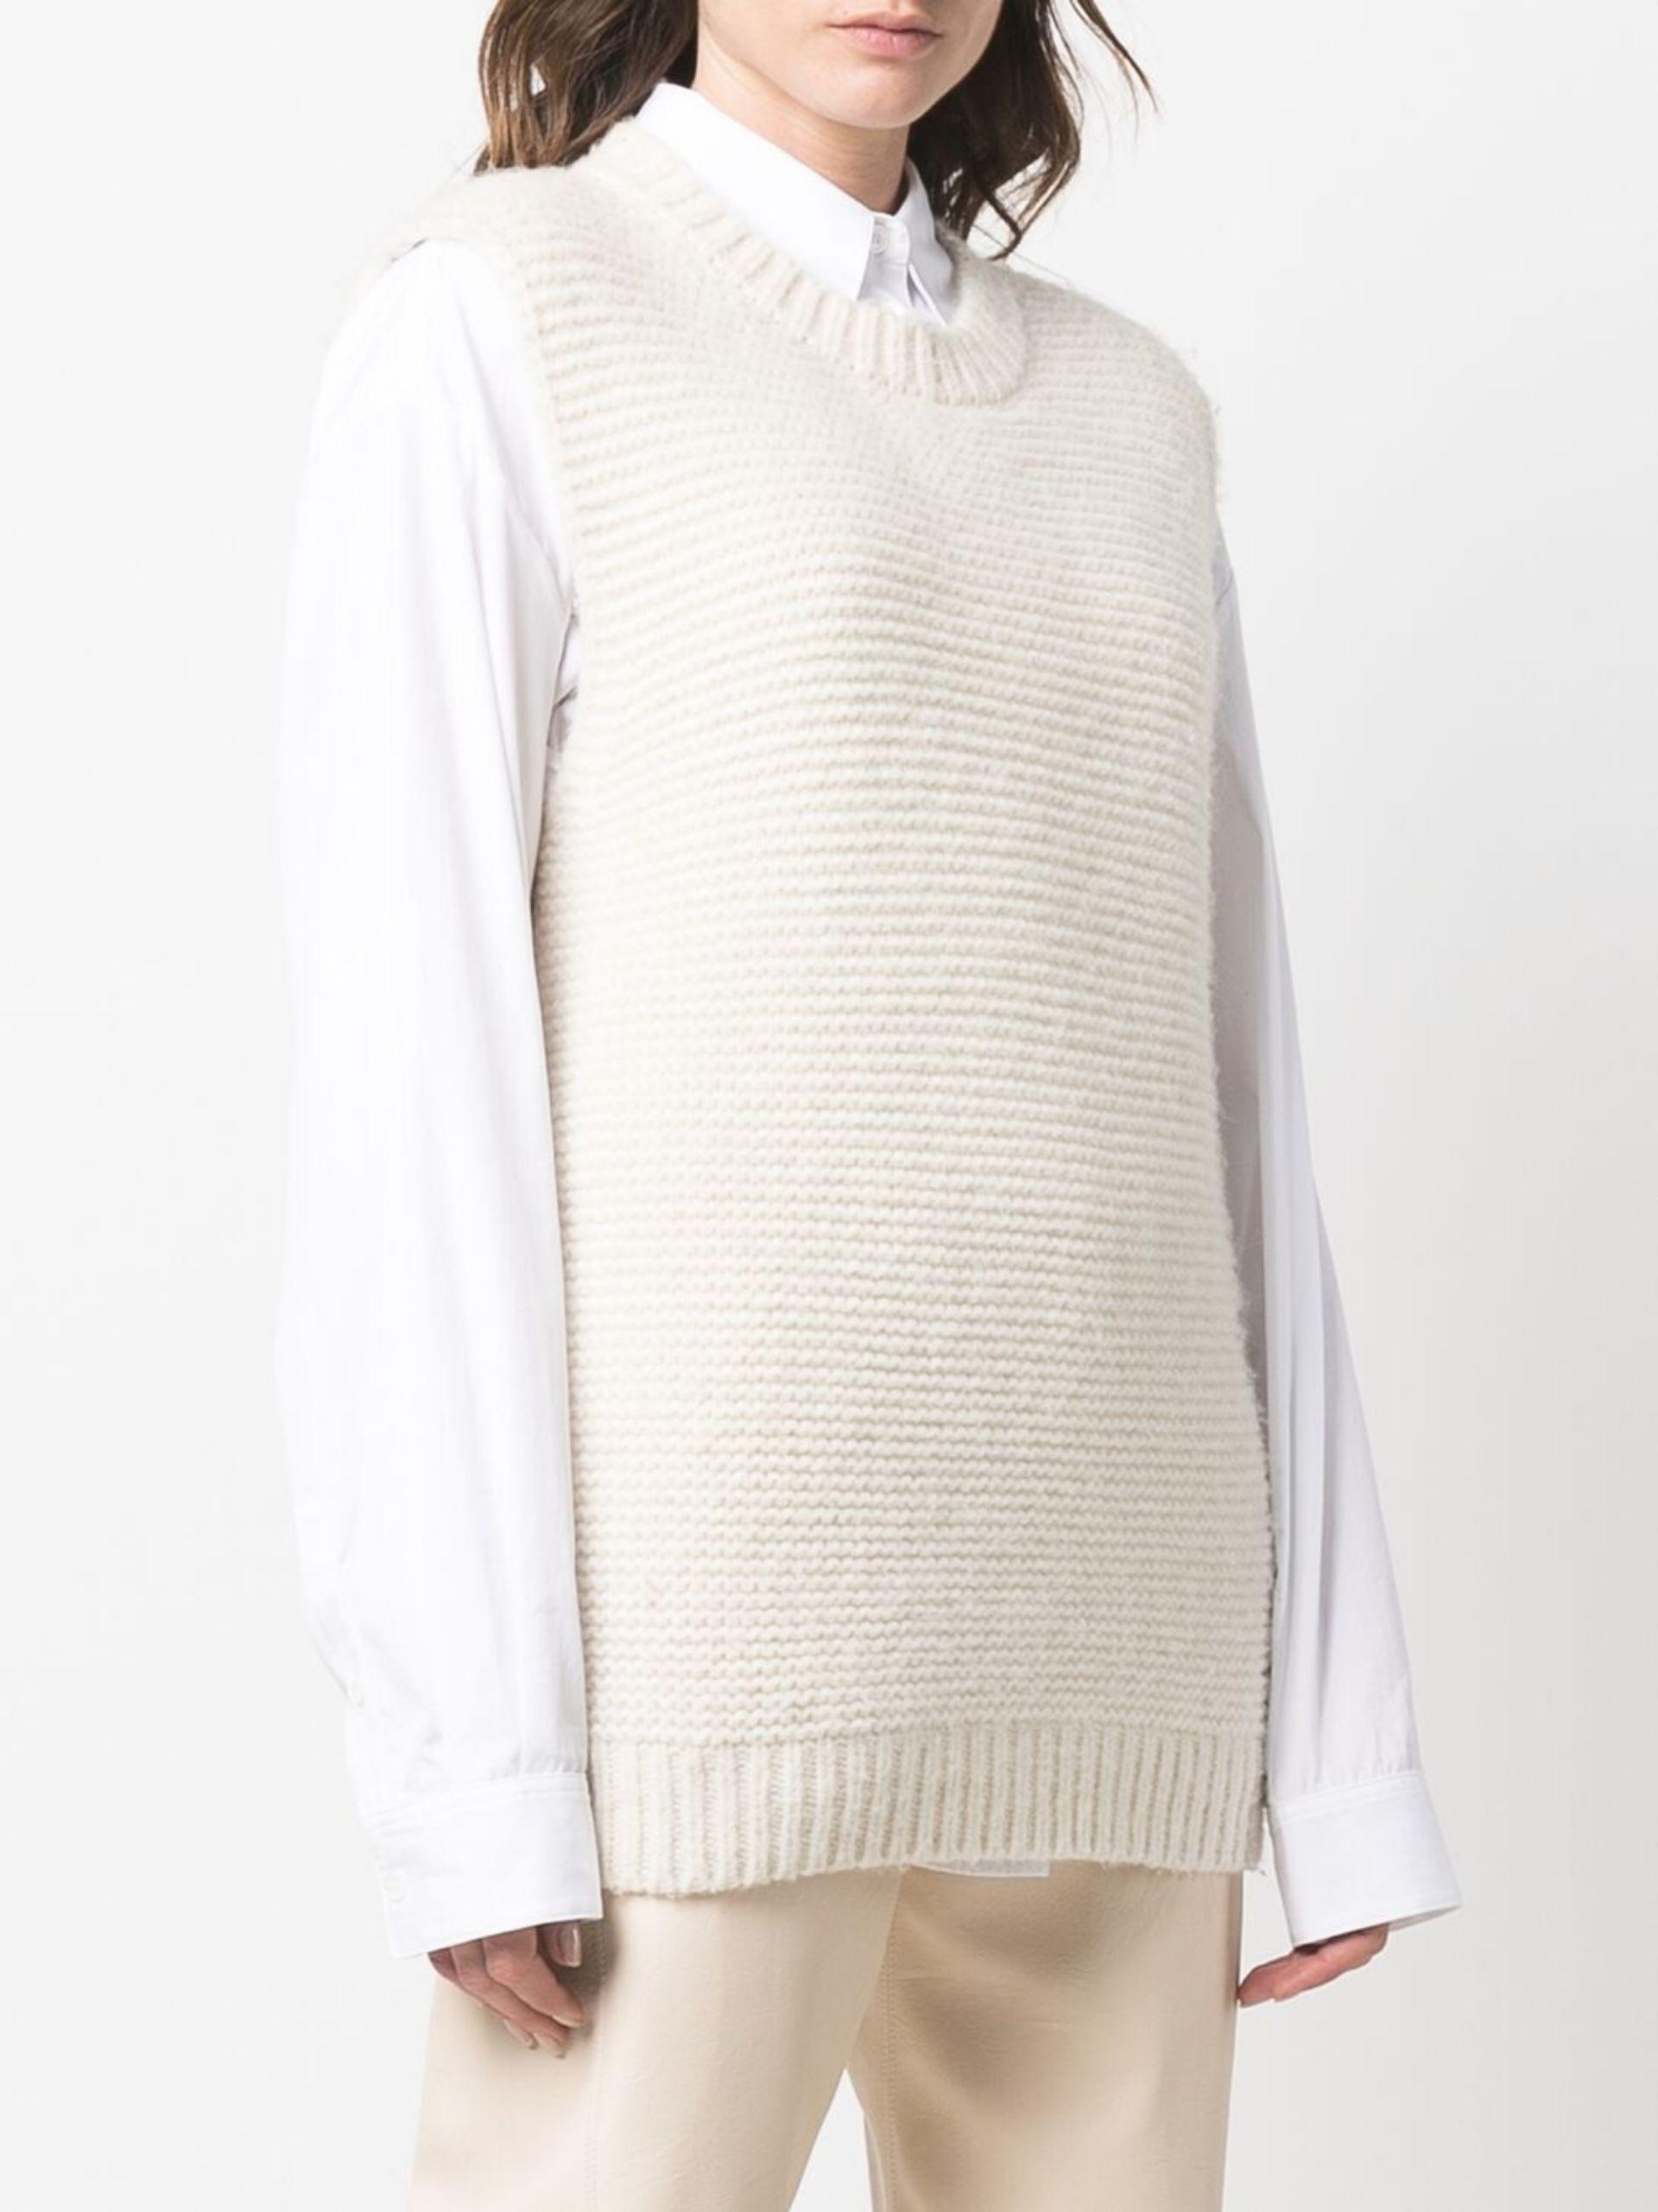 Stella McCartney Neutral Sleeveless Knitted Vest in White Womens Clothing Jumpers and knitwear Sleeveless jumpers 